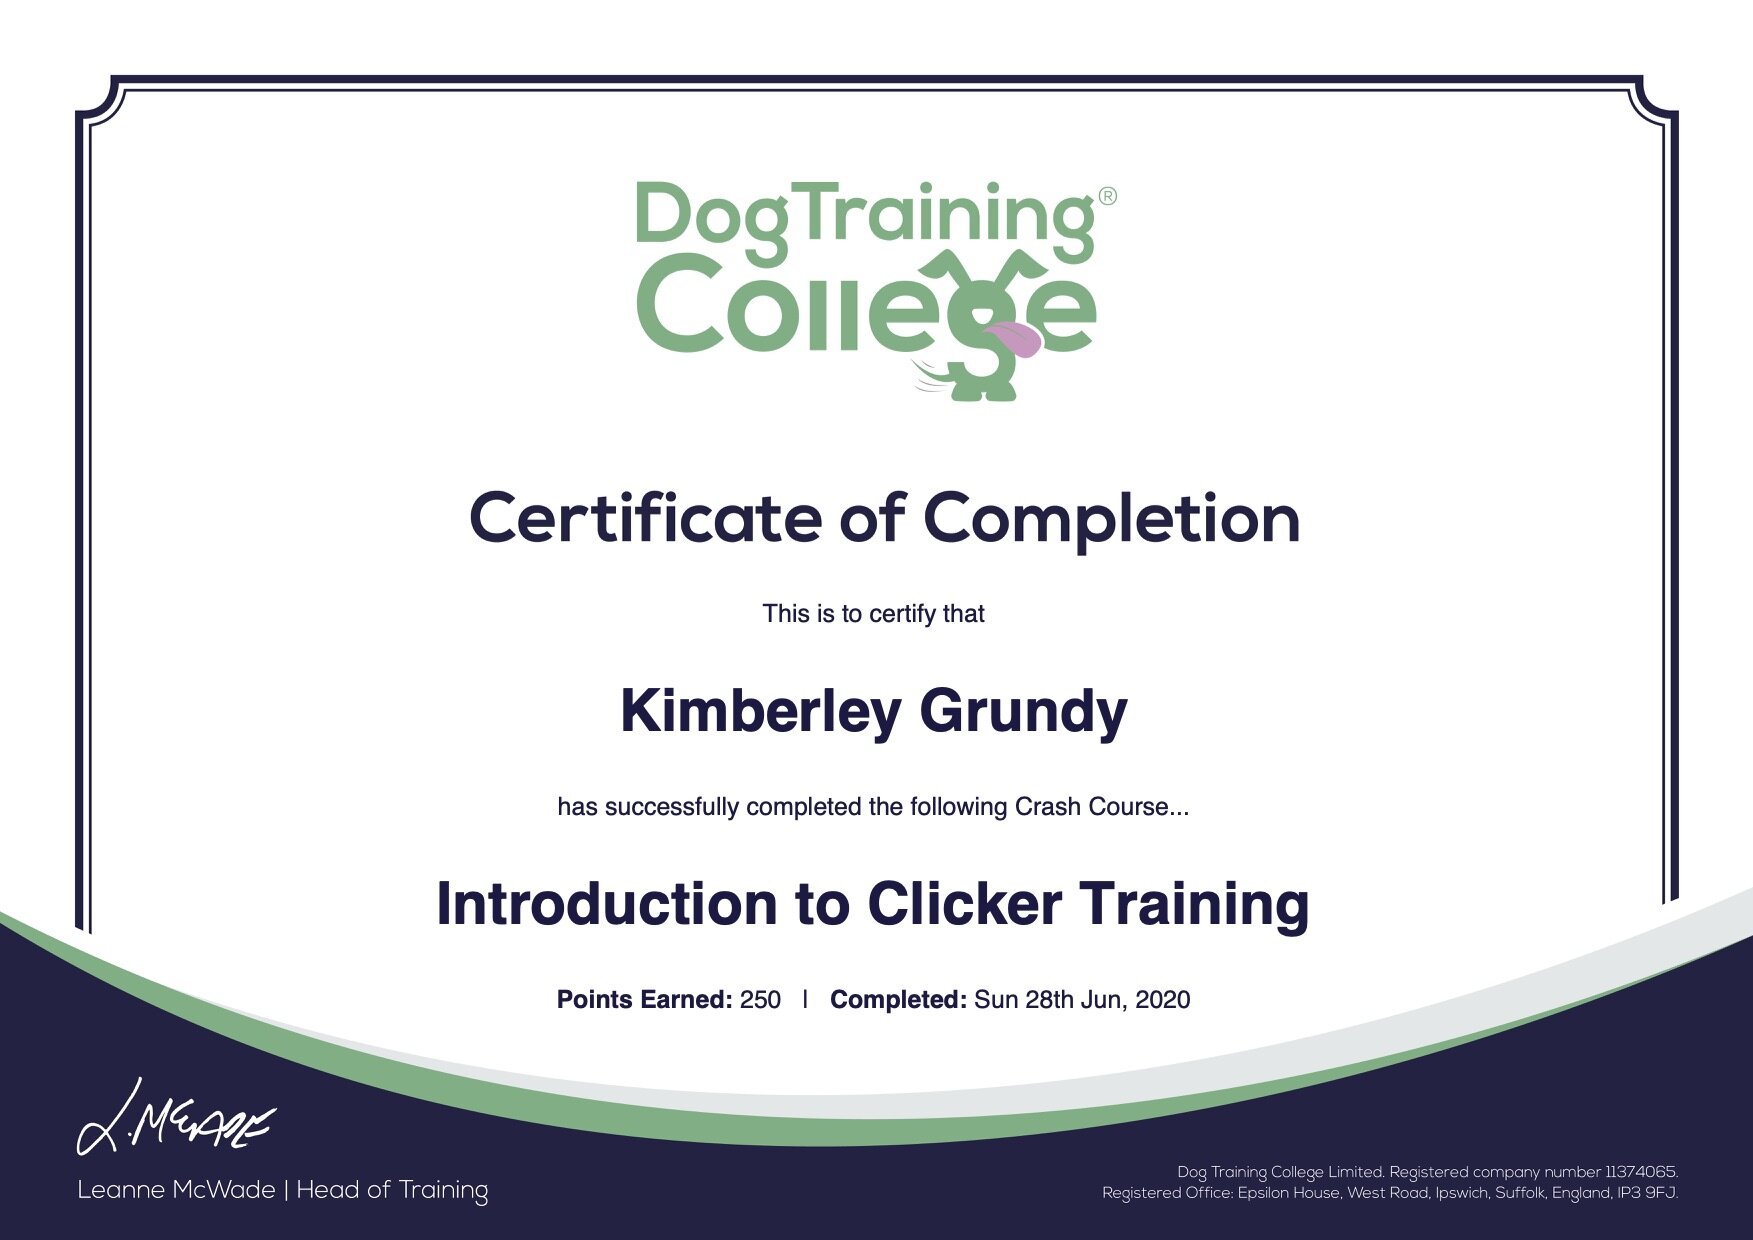 Certificate_of_Completion clicker training.jpg